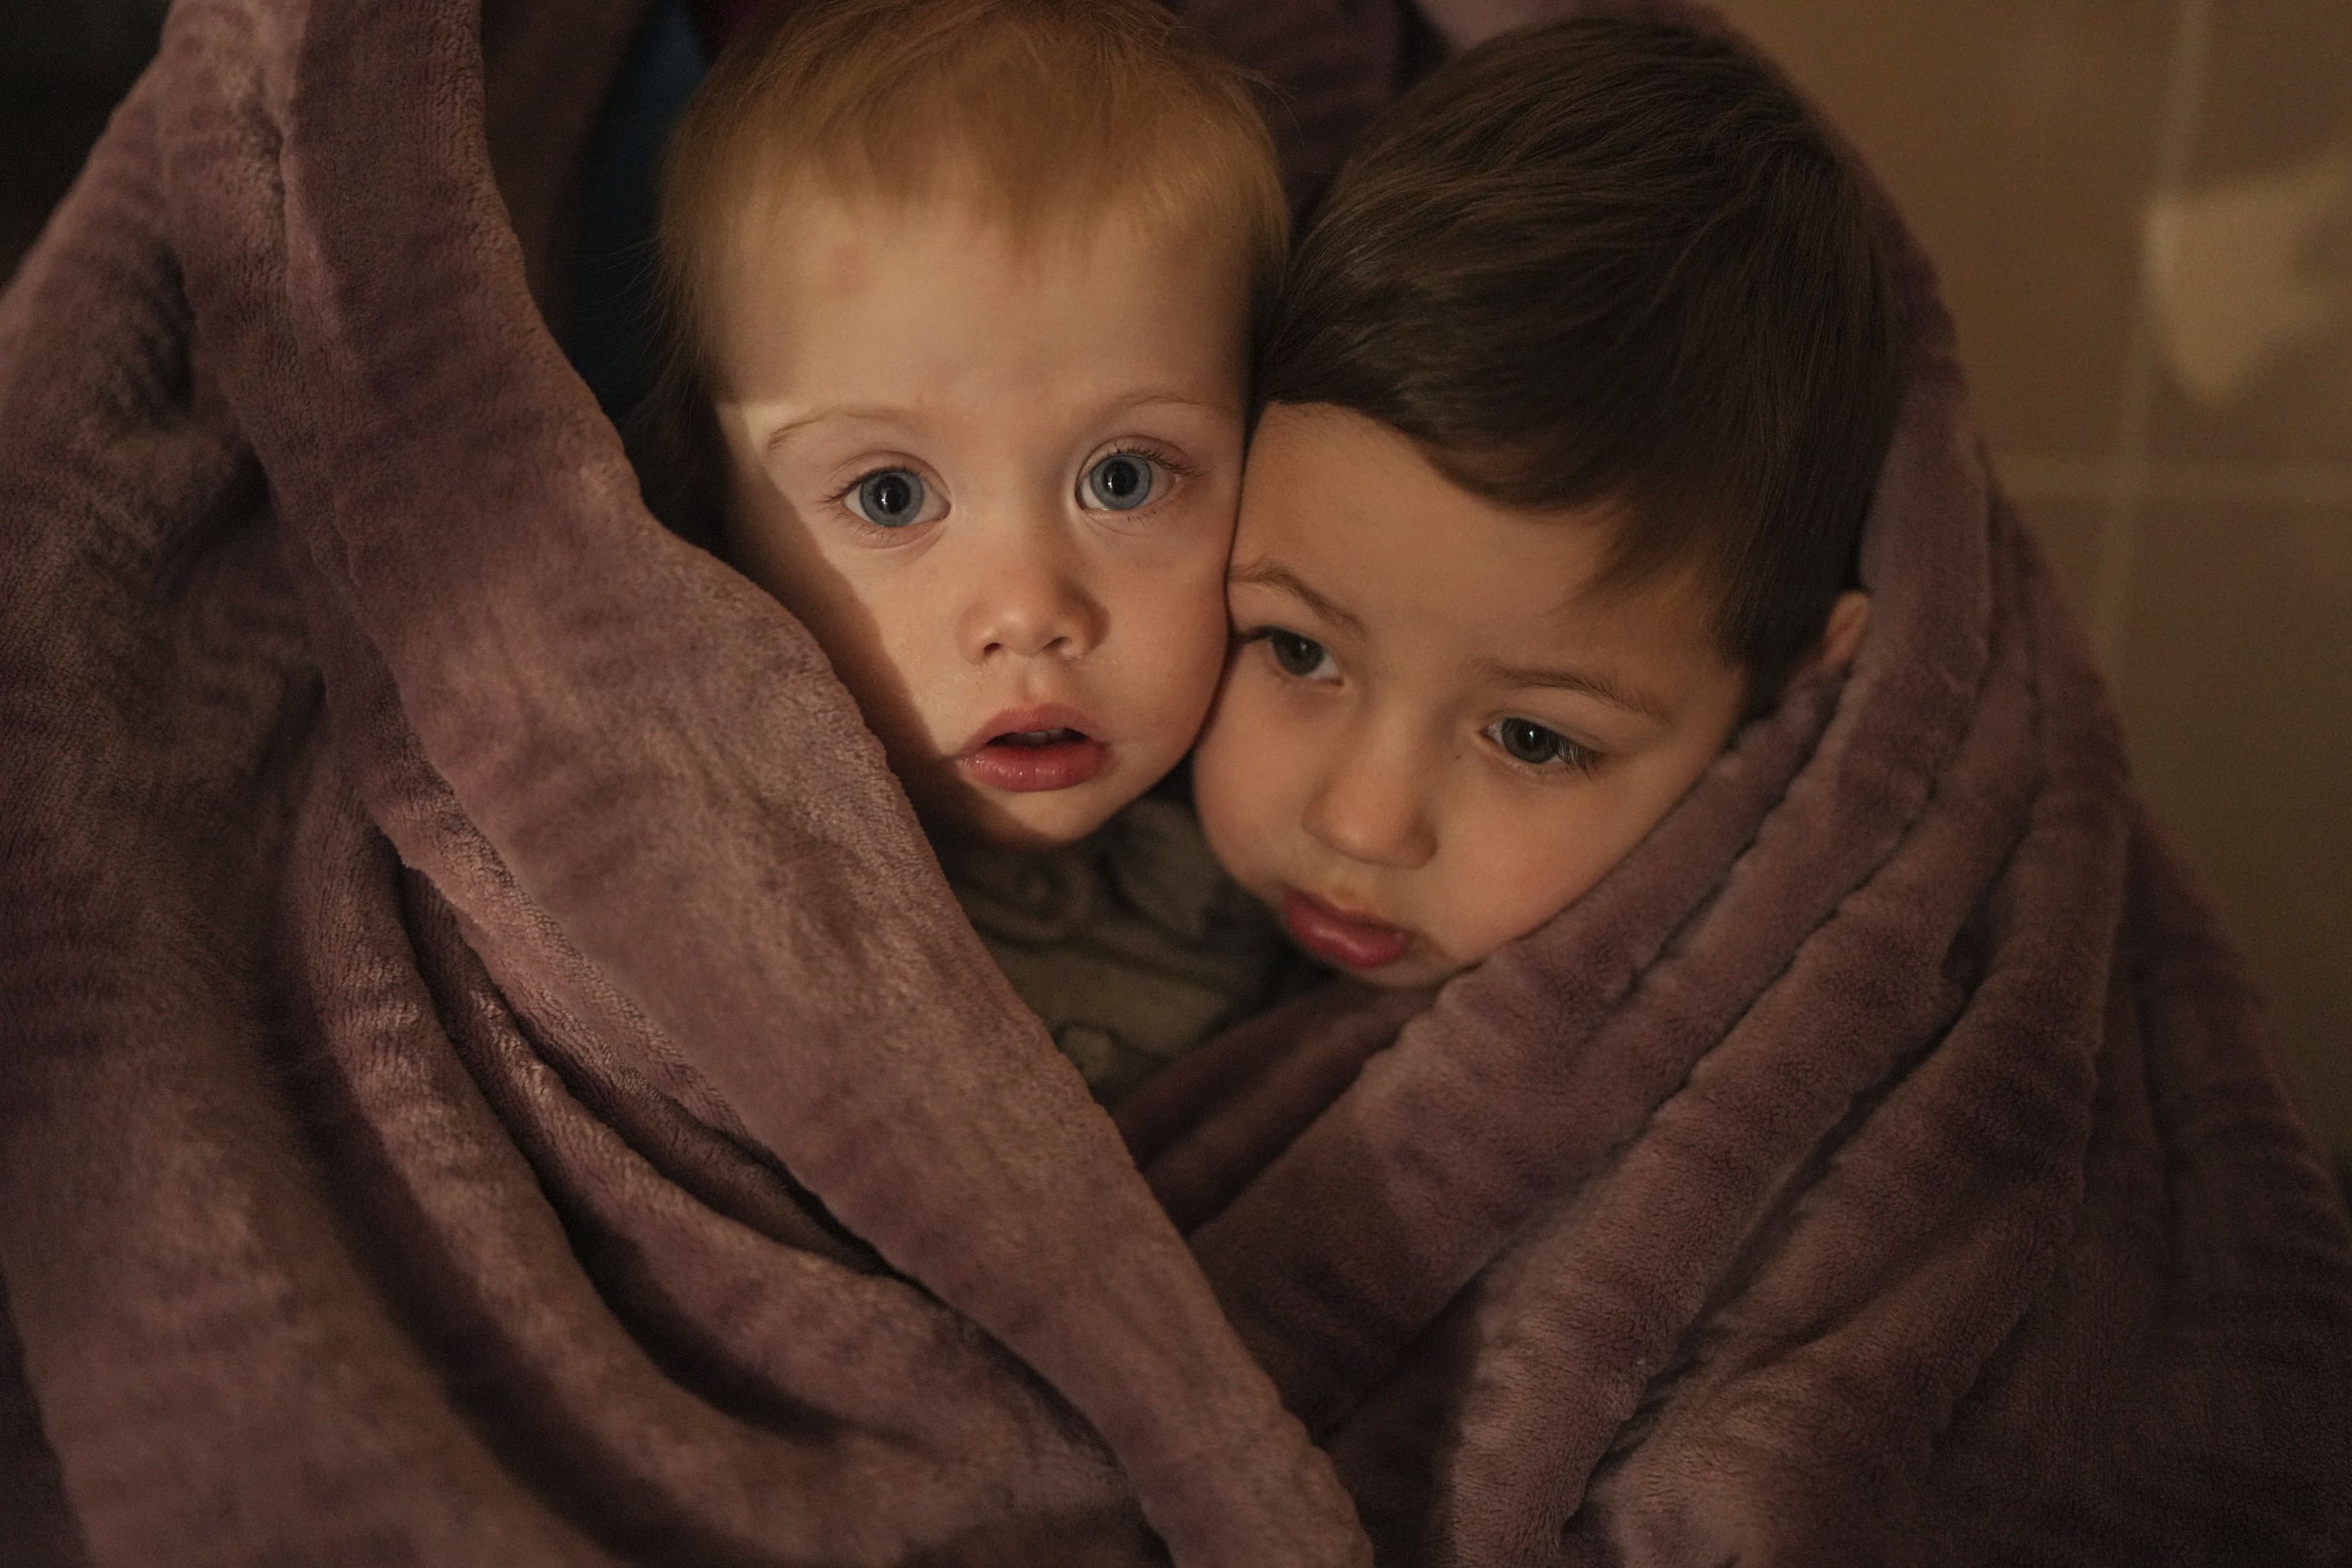 The children of medical workers warm themselves in a blanket as they wait for their relatives in a hospital in Mariupol, Ukraine, Friday, March 4, 2022. (Evgeniy Maloletka/AP)